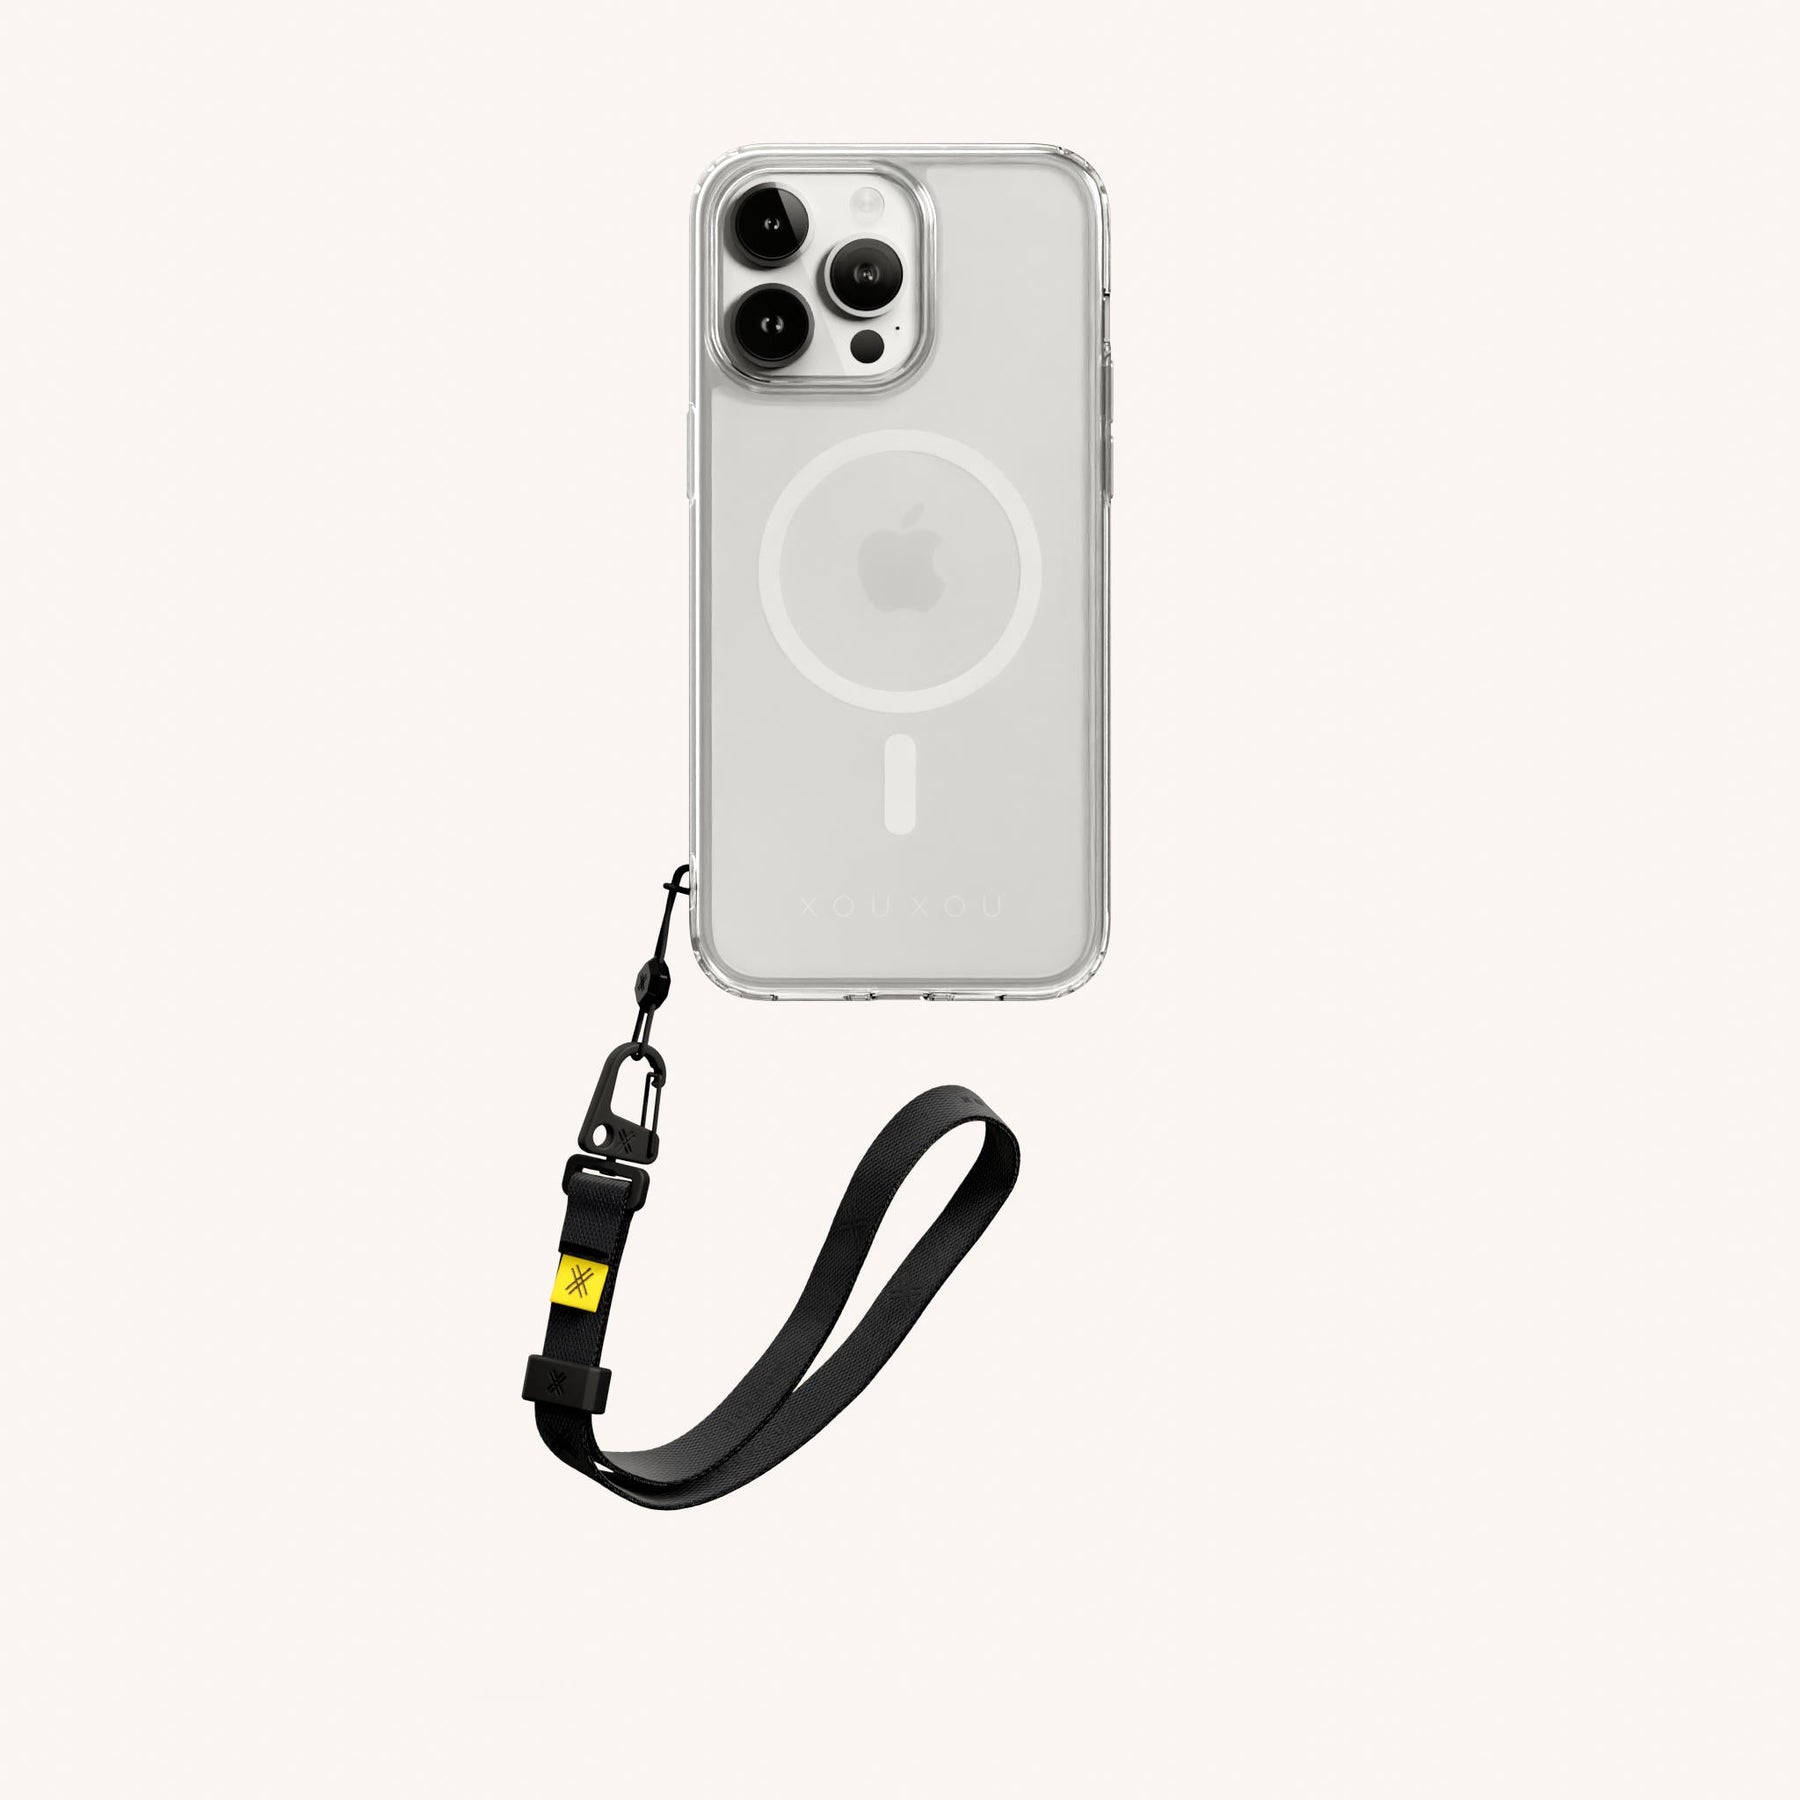 Phone Case with Wrist Strap in Clear + Black